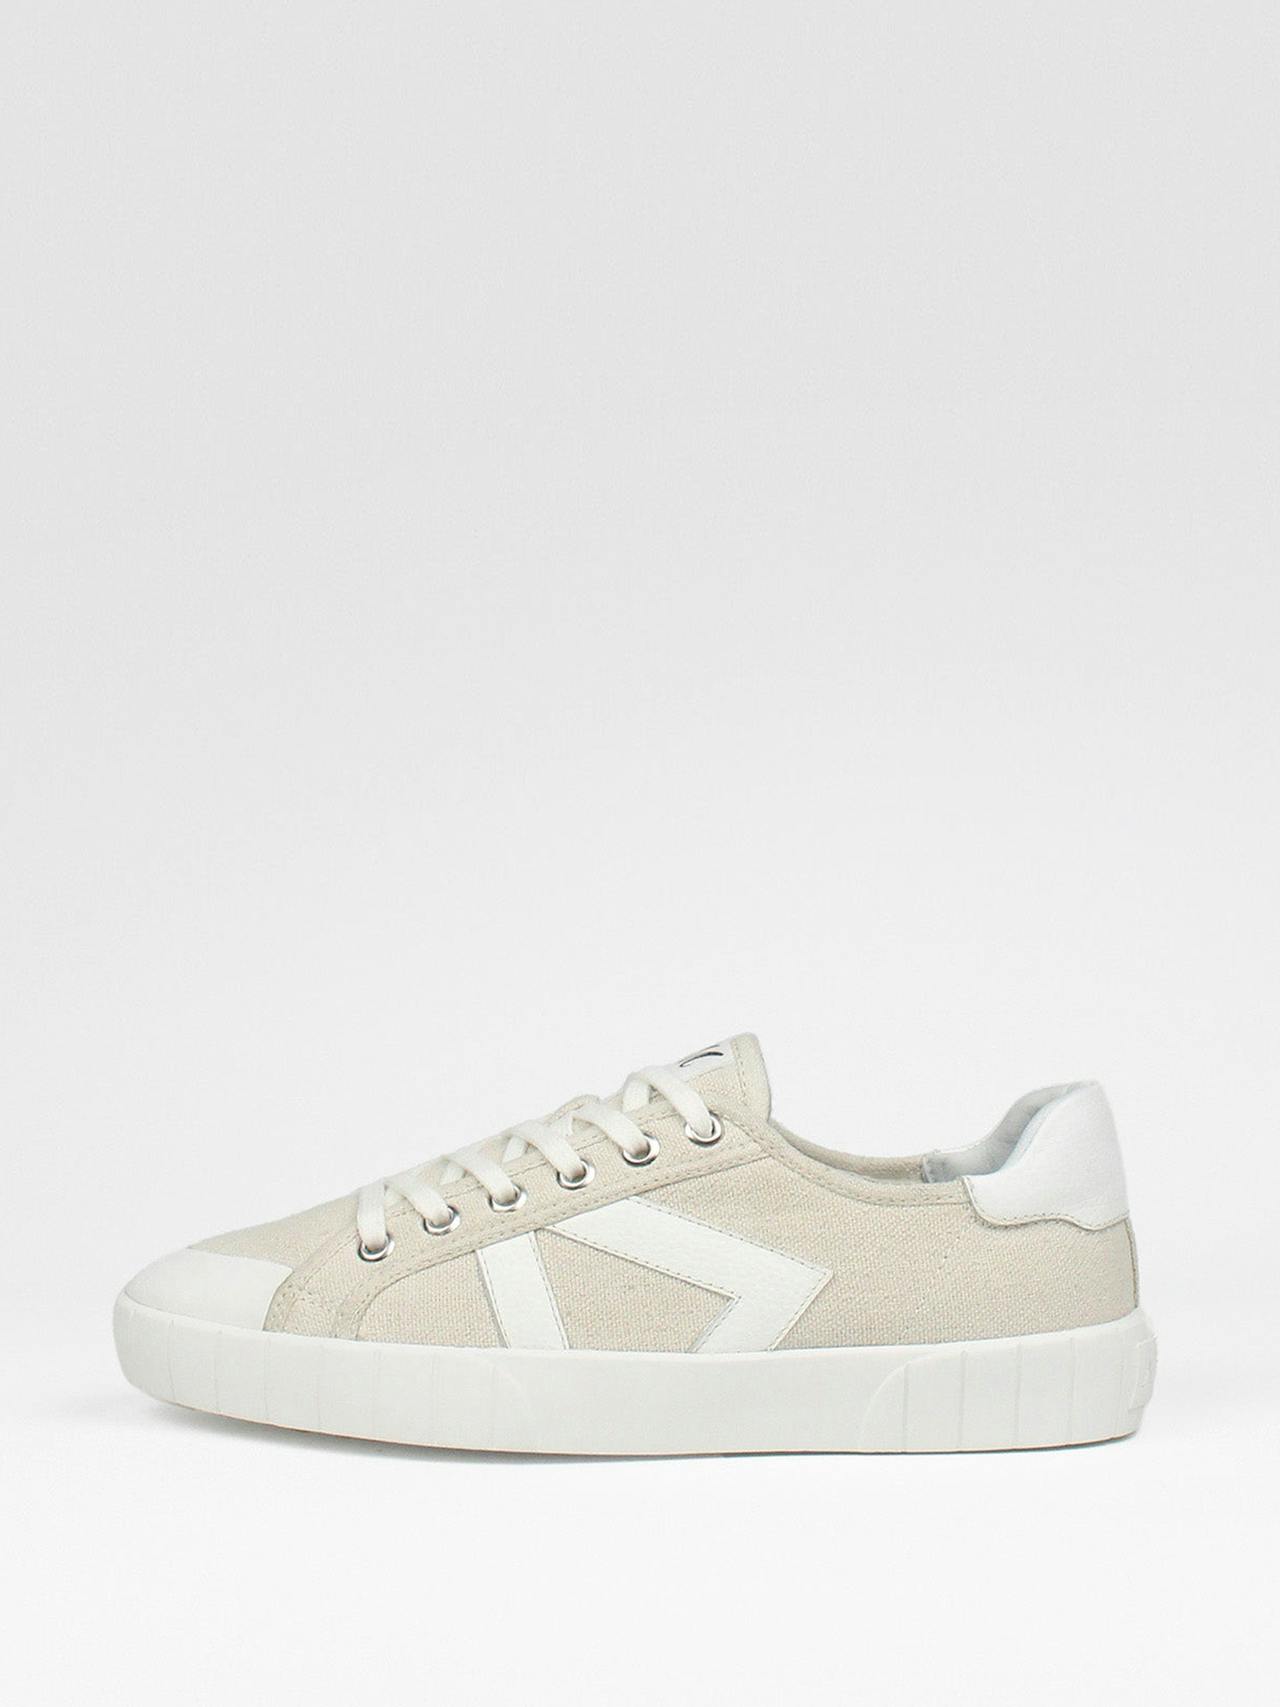 The Helios beige and white trainers